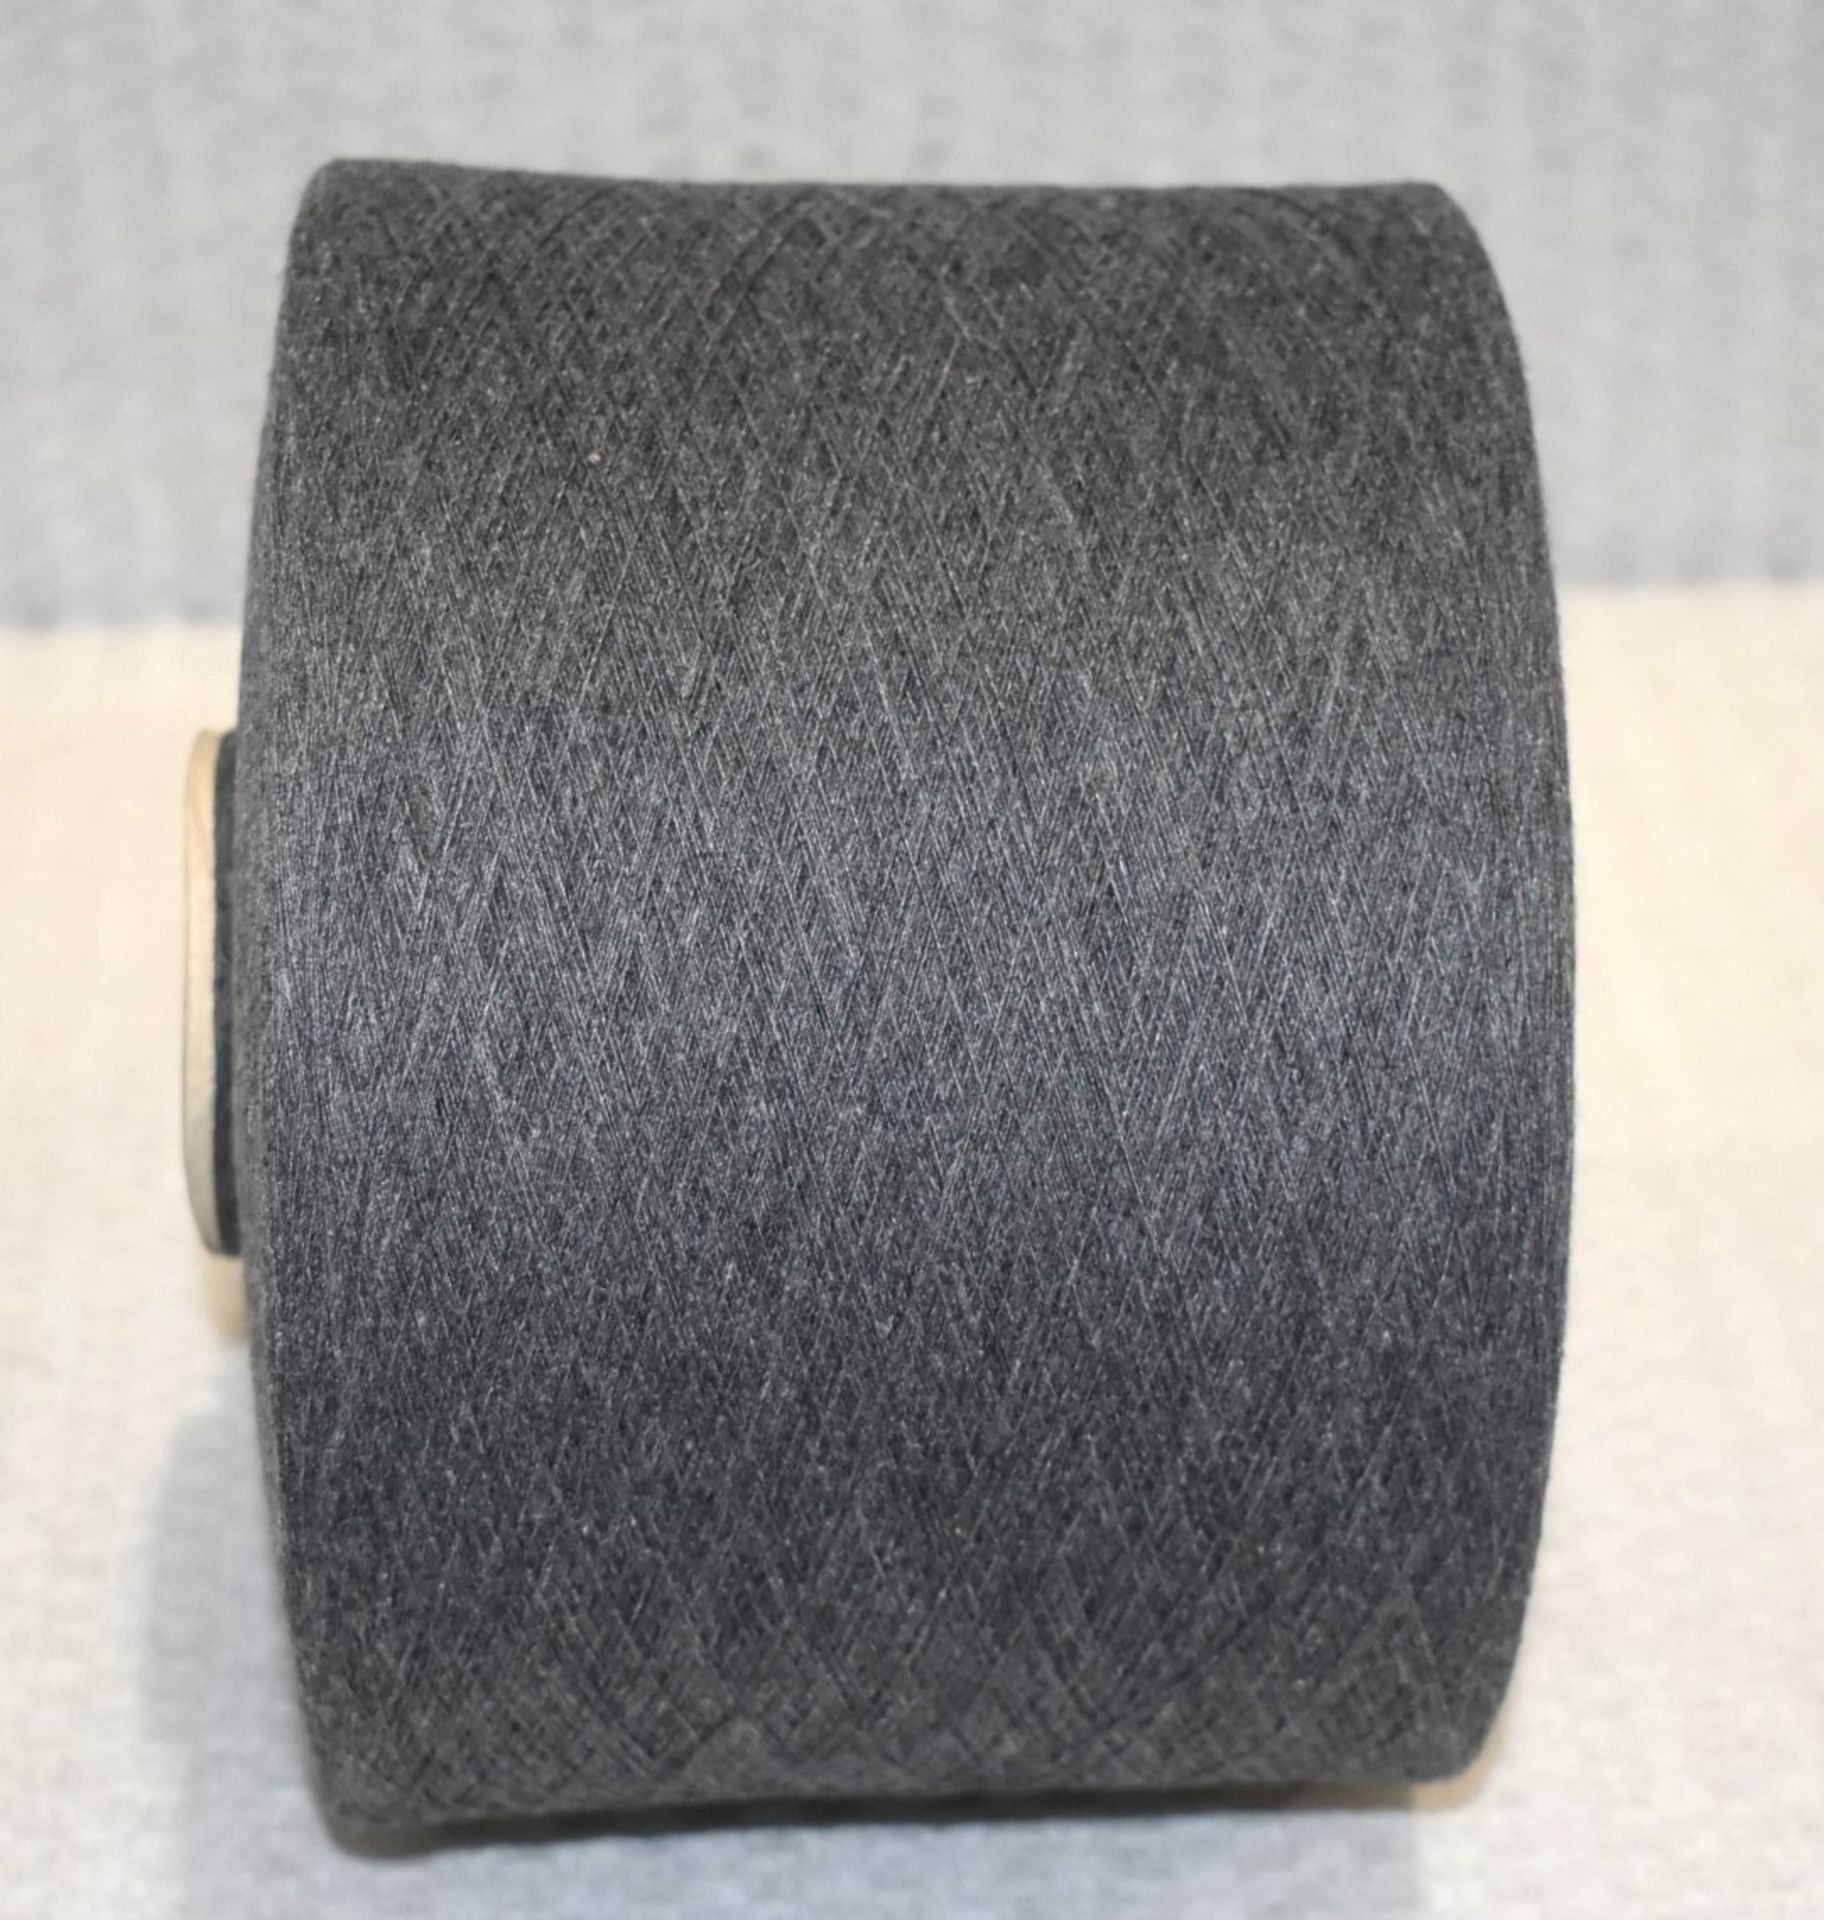 1 x Cone of 1/13 MicroCotton Knitting Yarn - Mid Grey - Approx Weight: 2,500g - New Stock ABL Yarn - Image 9 of 9